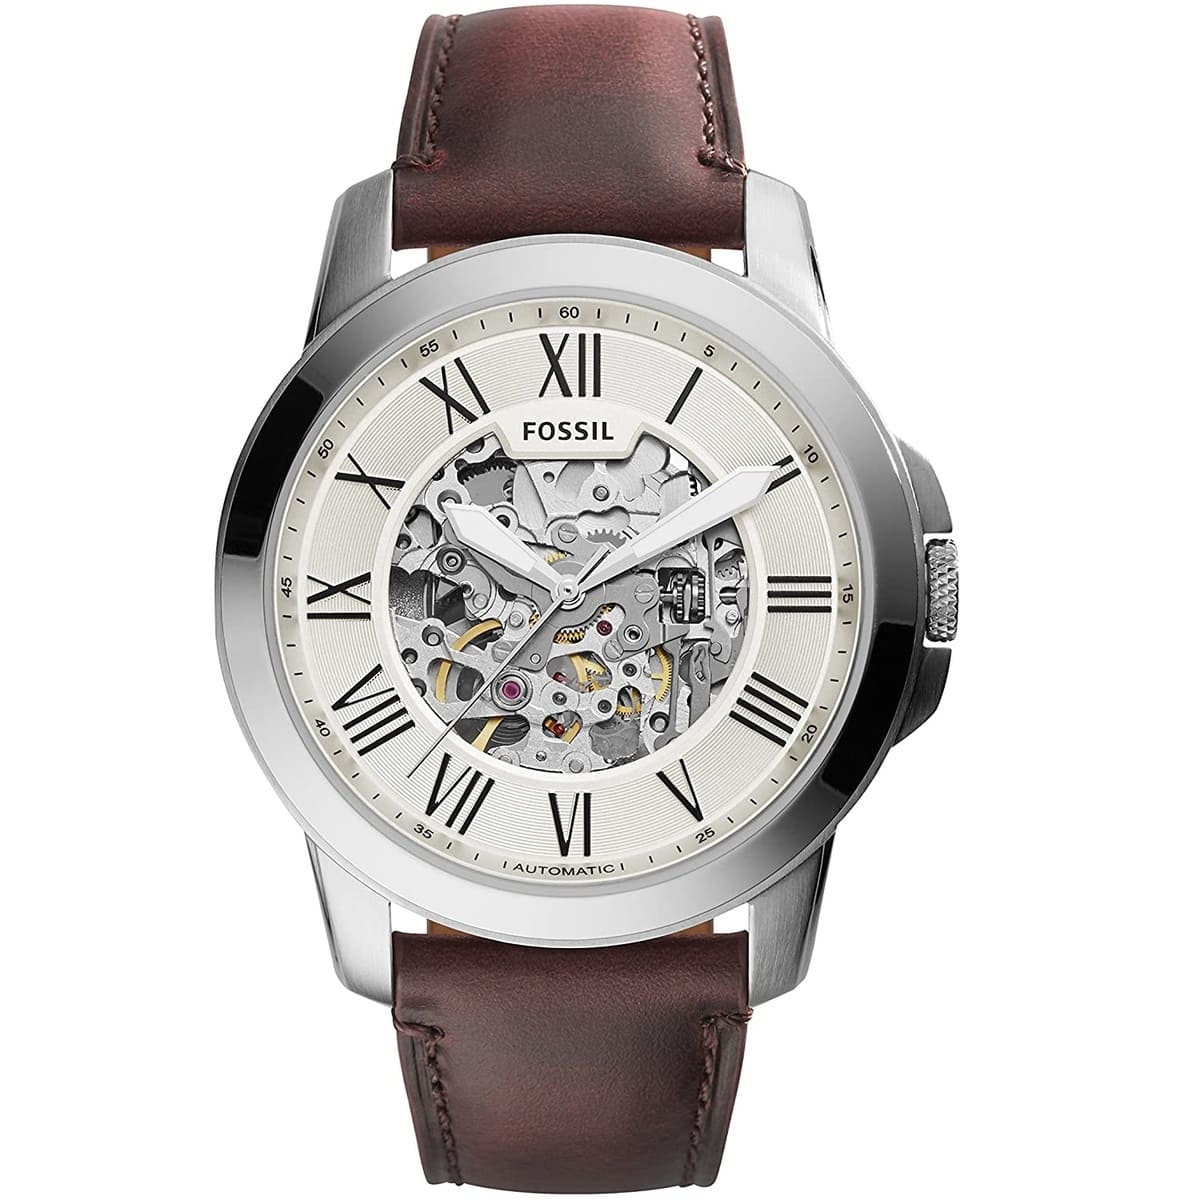 me3099-original-automatic-fossil-watch-brown-leather-men